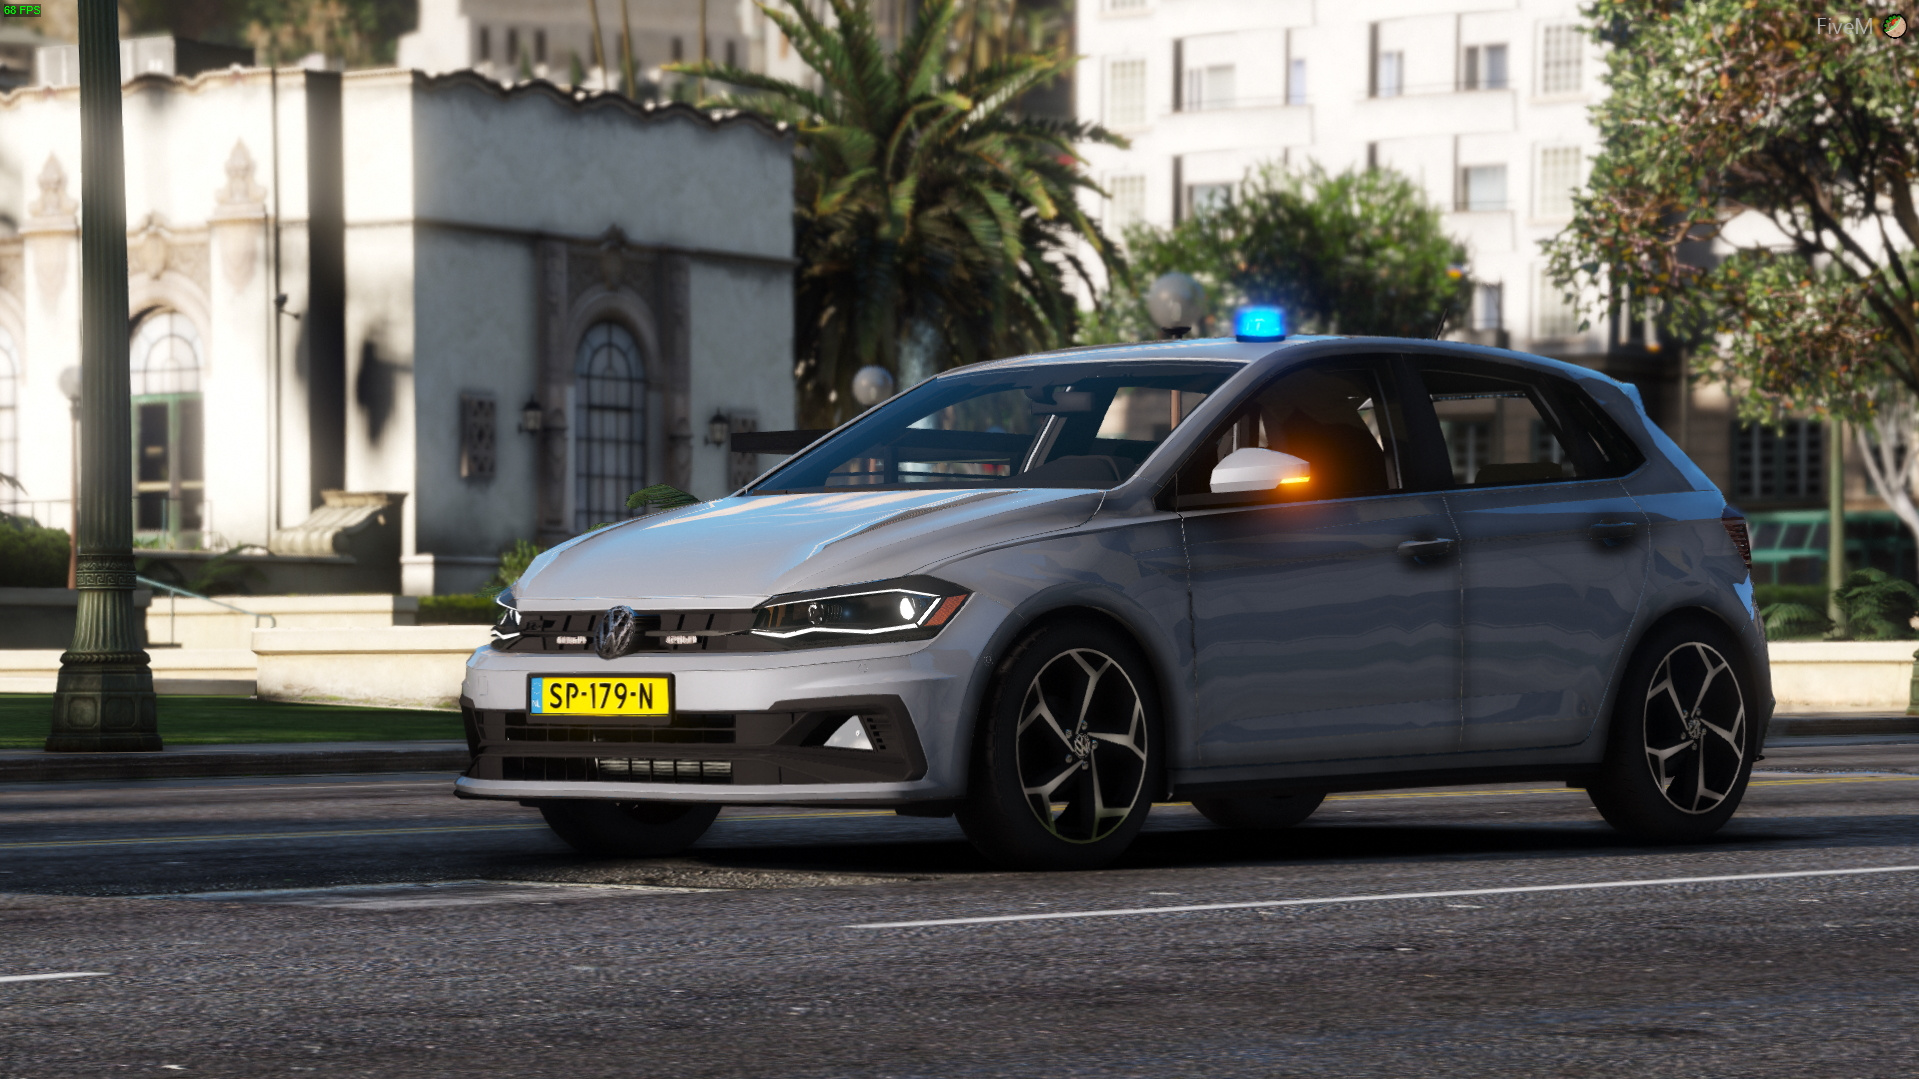 Vw Polo R Line Unmarked Police Gta 5 Mods